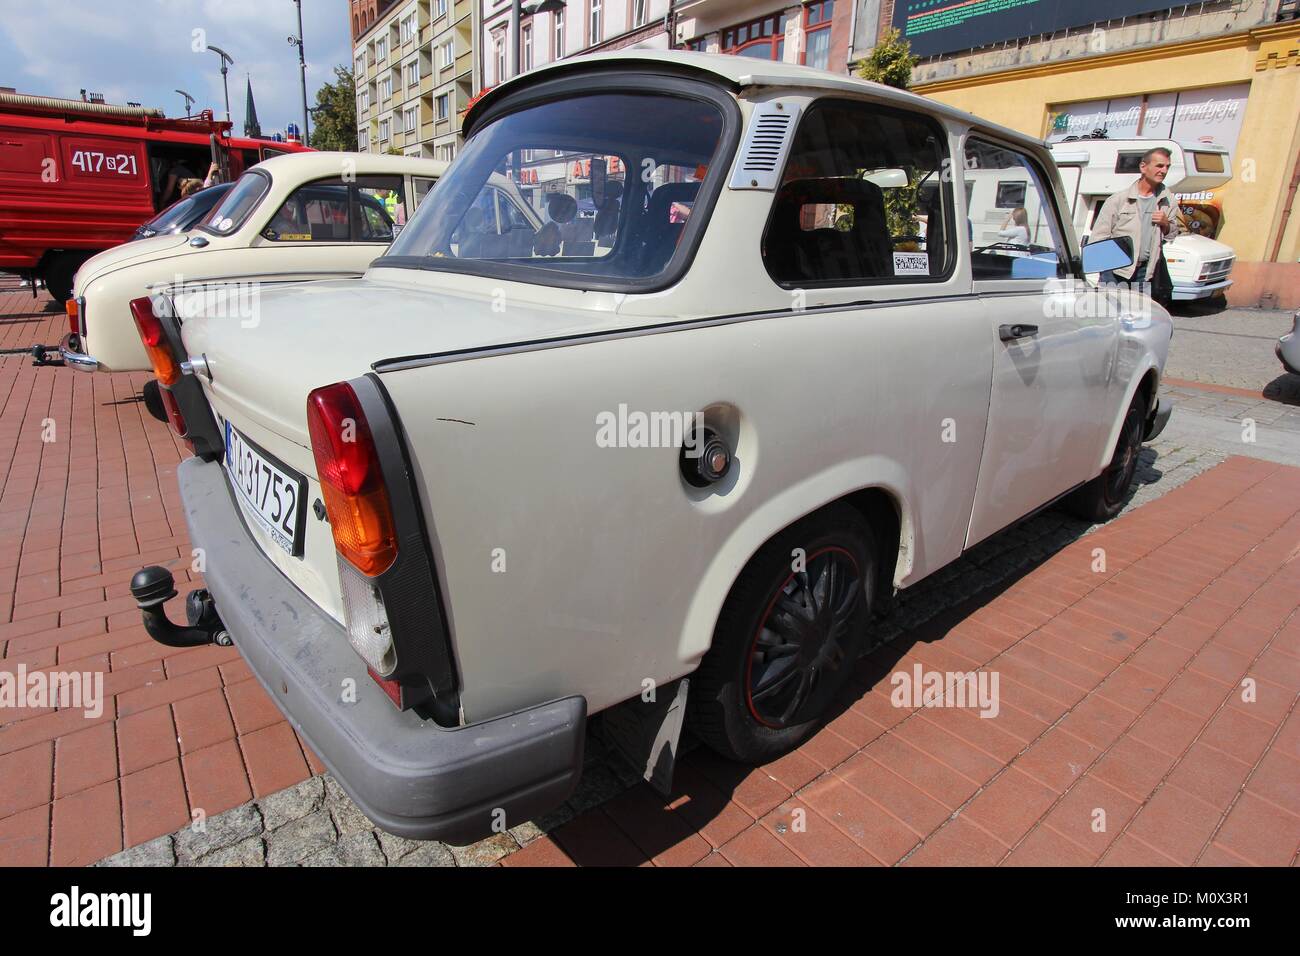 BYTOM, POLAND - SEPTEMBER 12, 2015: People walk by Trabant 601 oldtimer car during 12th Historic Vehicle Rally in Bytom. The annual vehicle parade is  Stock Photo